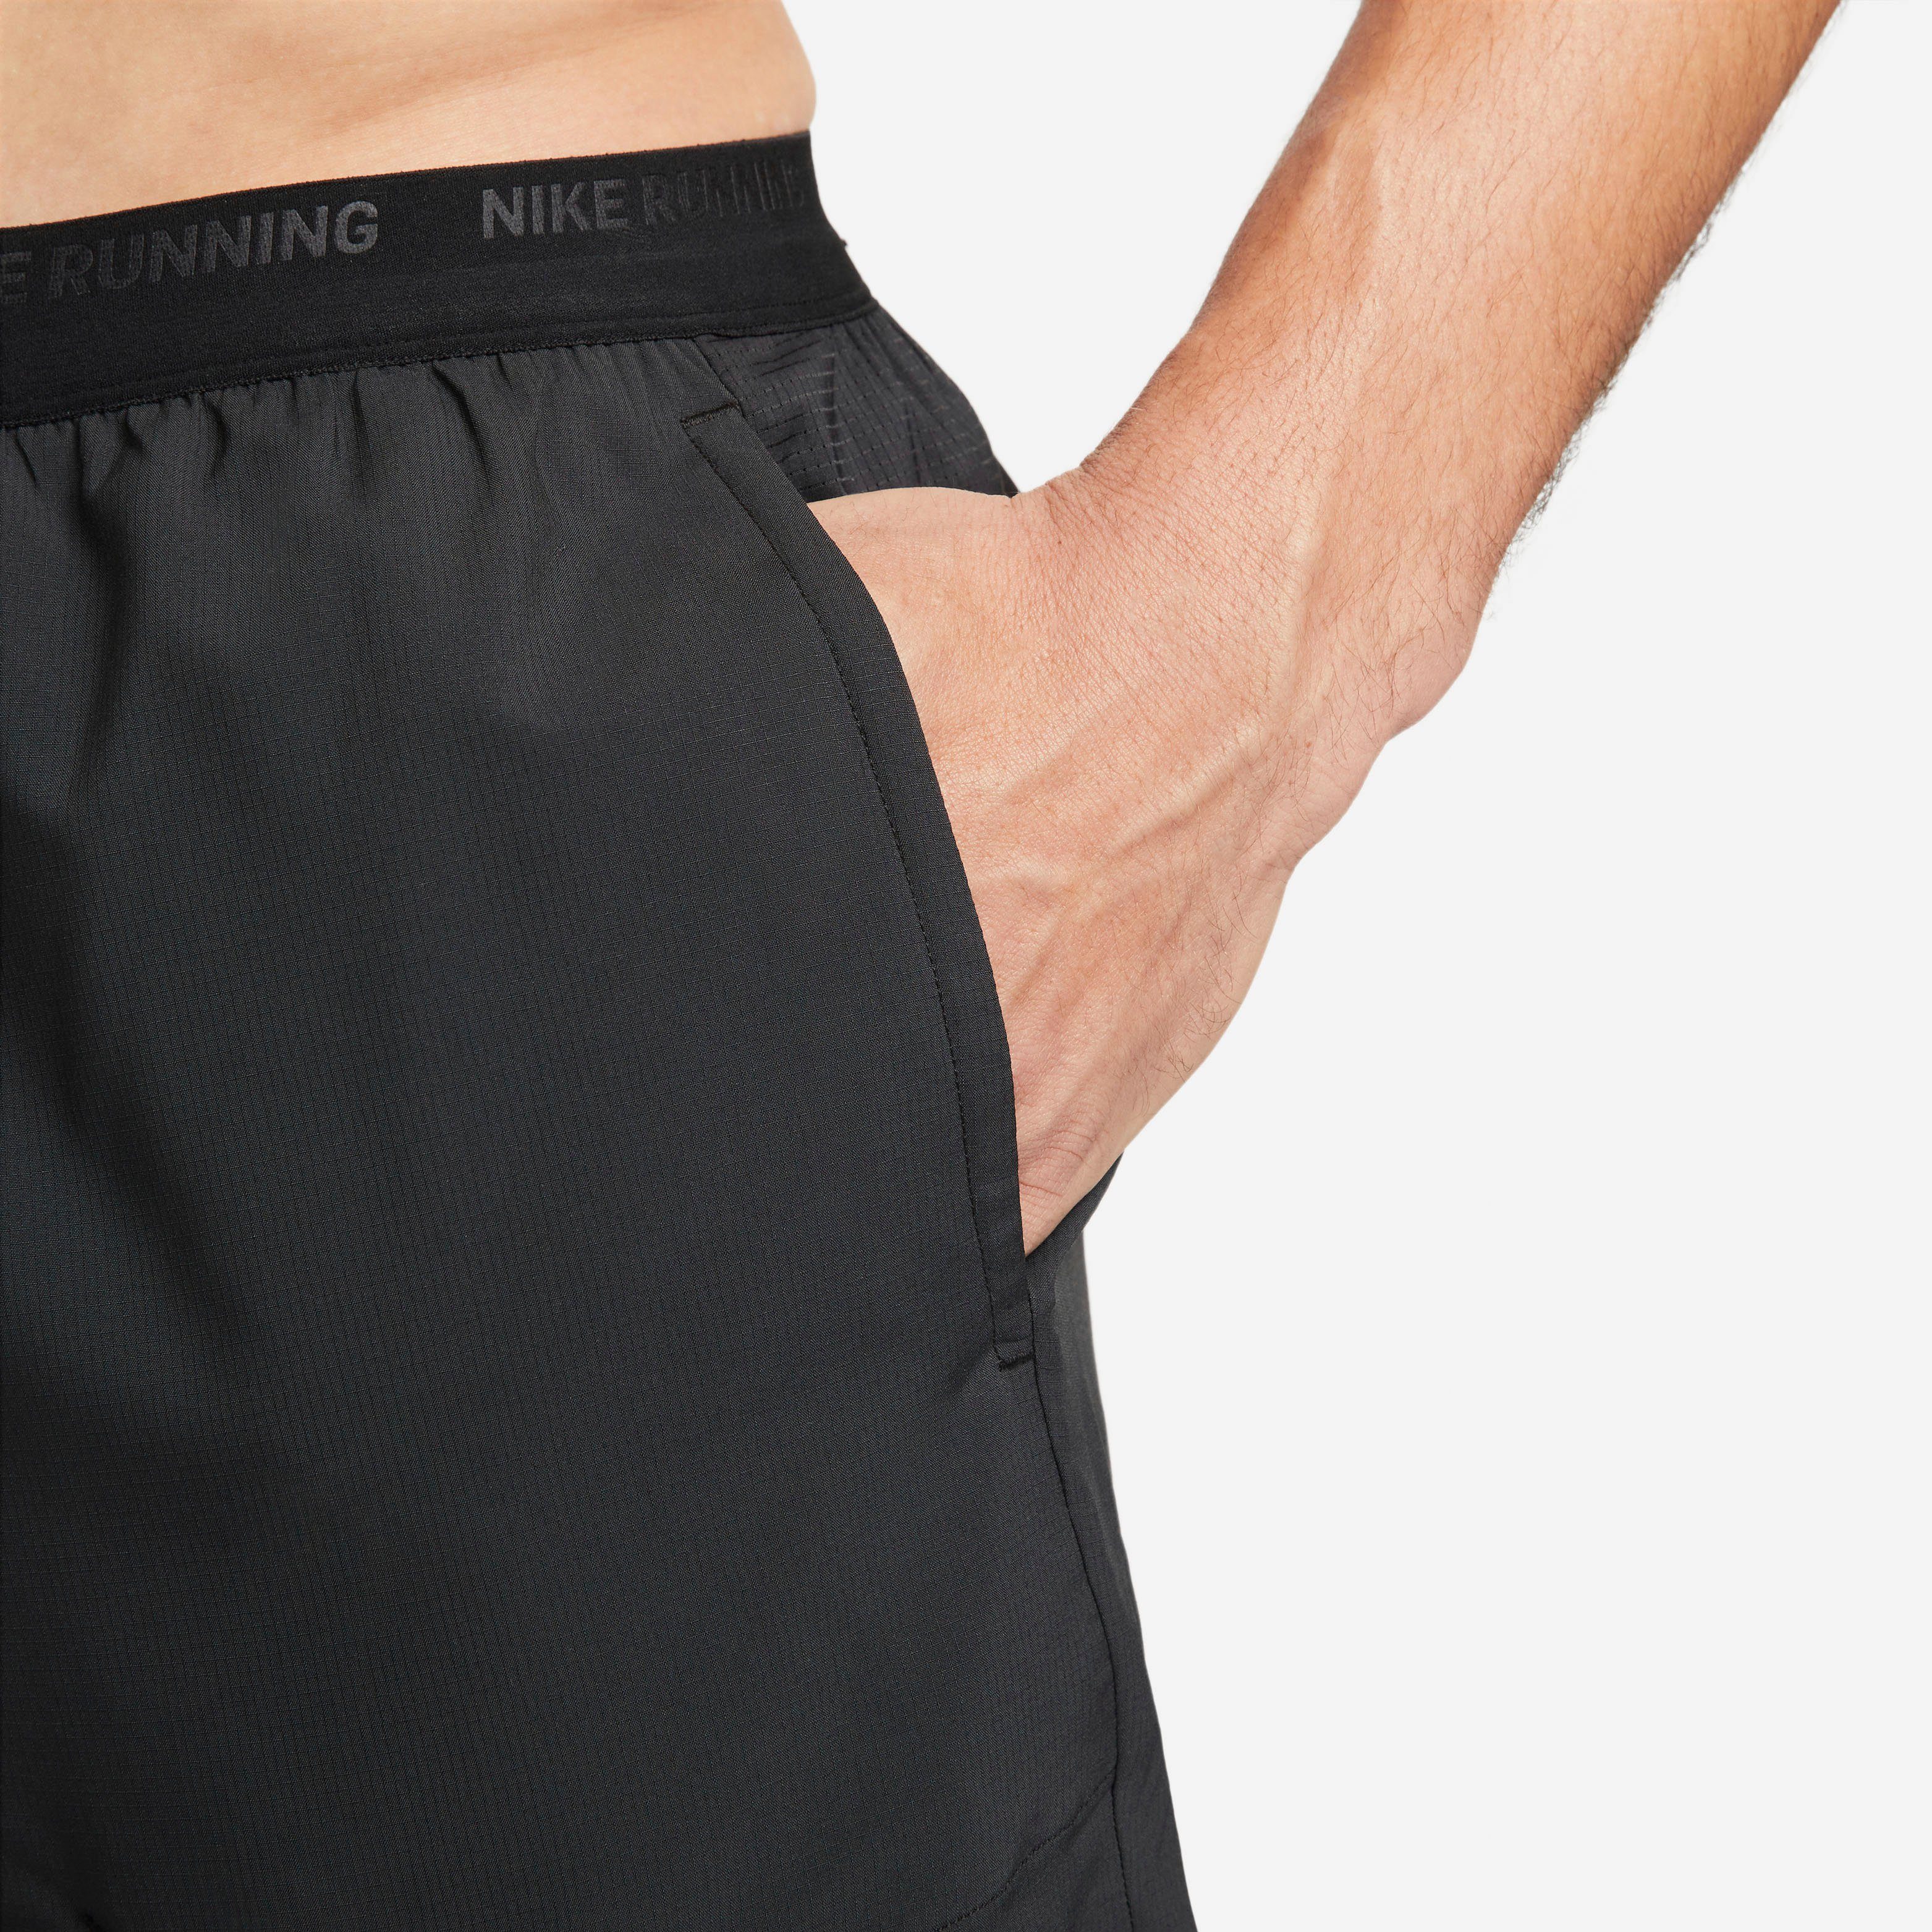 Stride Dri-FIT Nike Shorts Laufshorts " Brief-Lined Running Men's